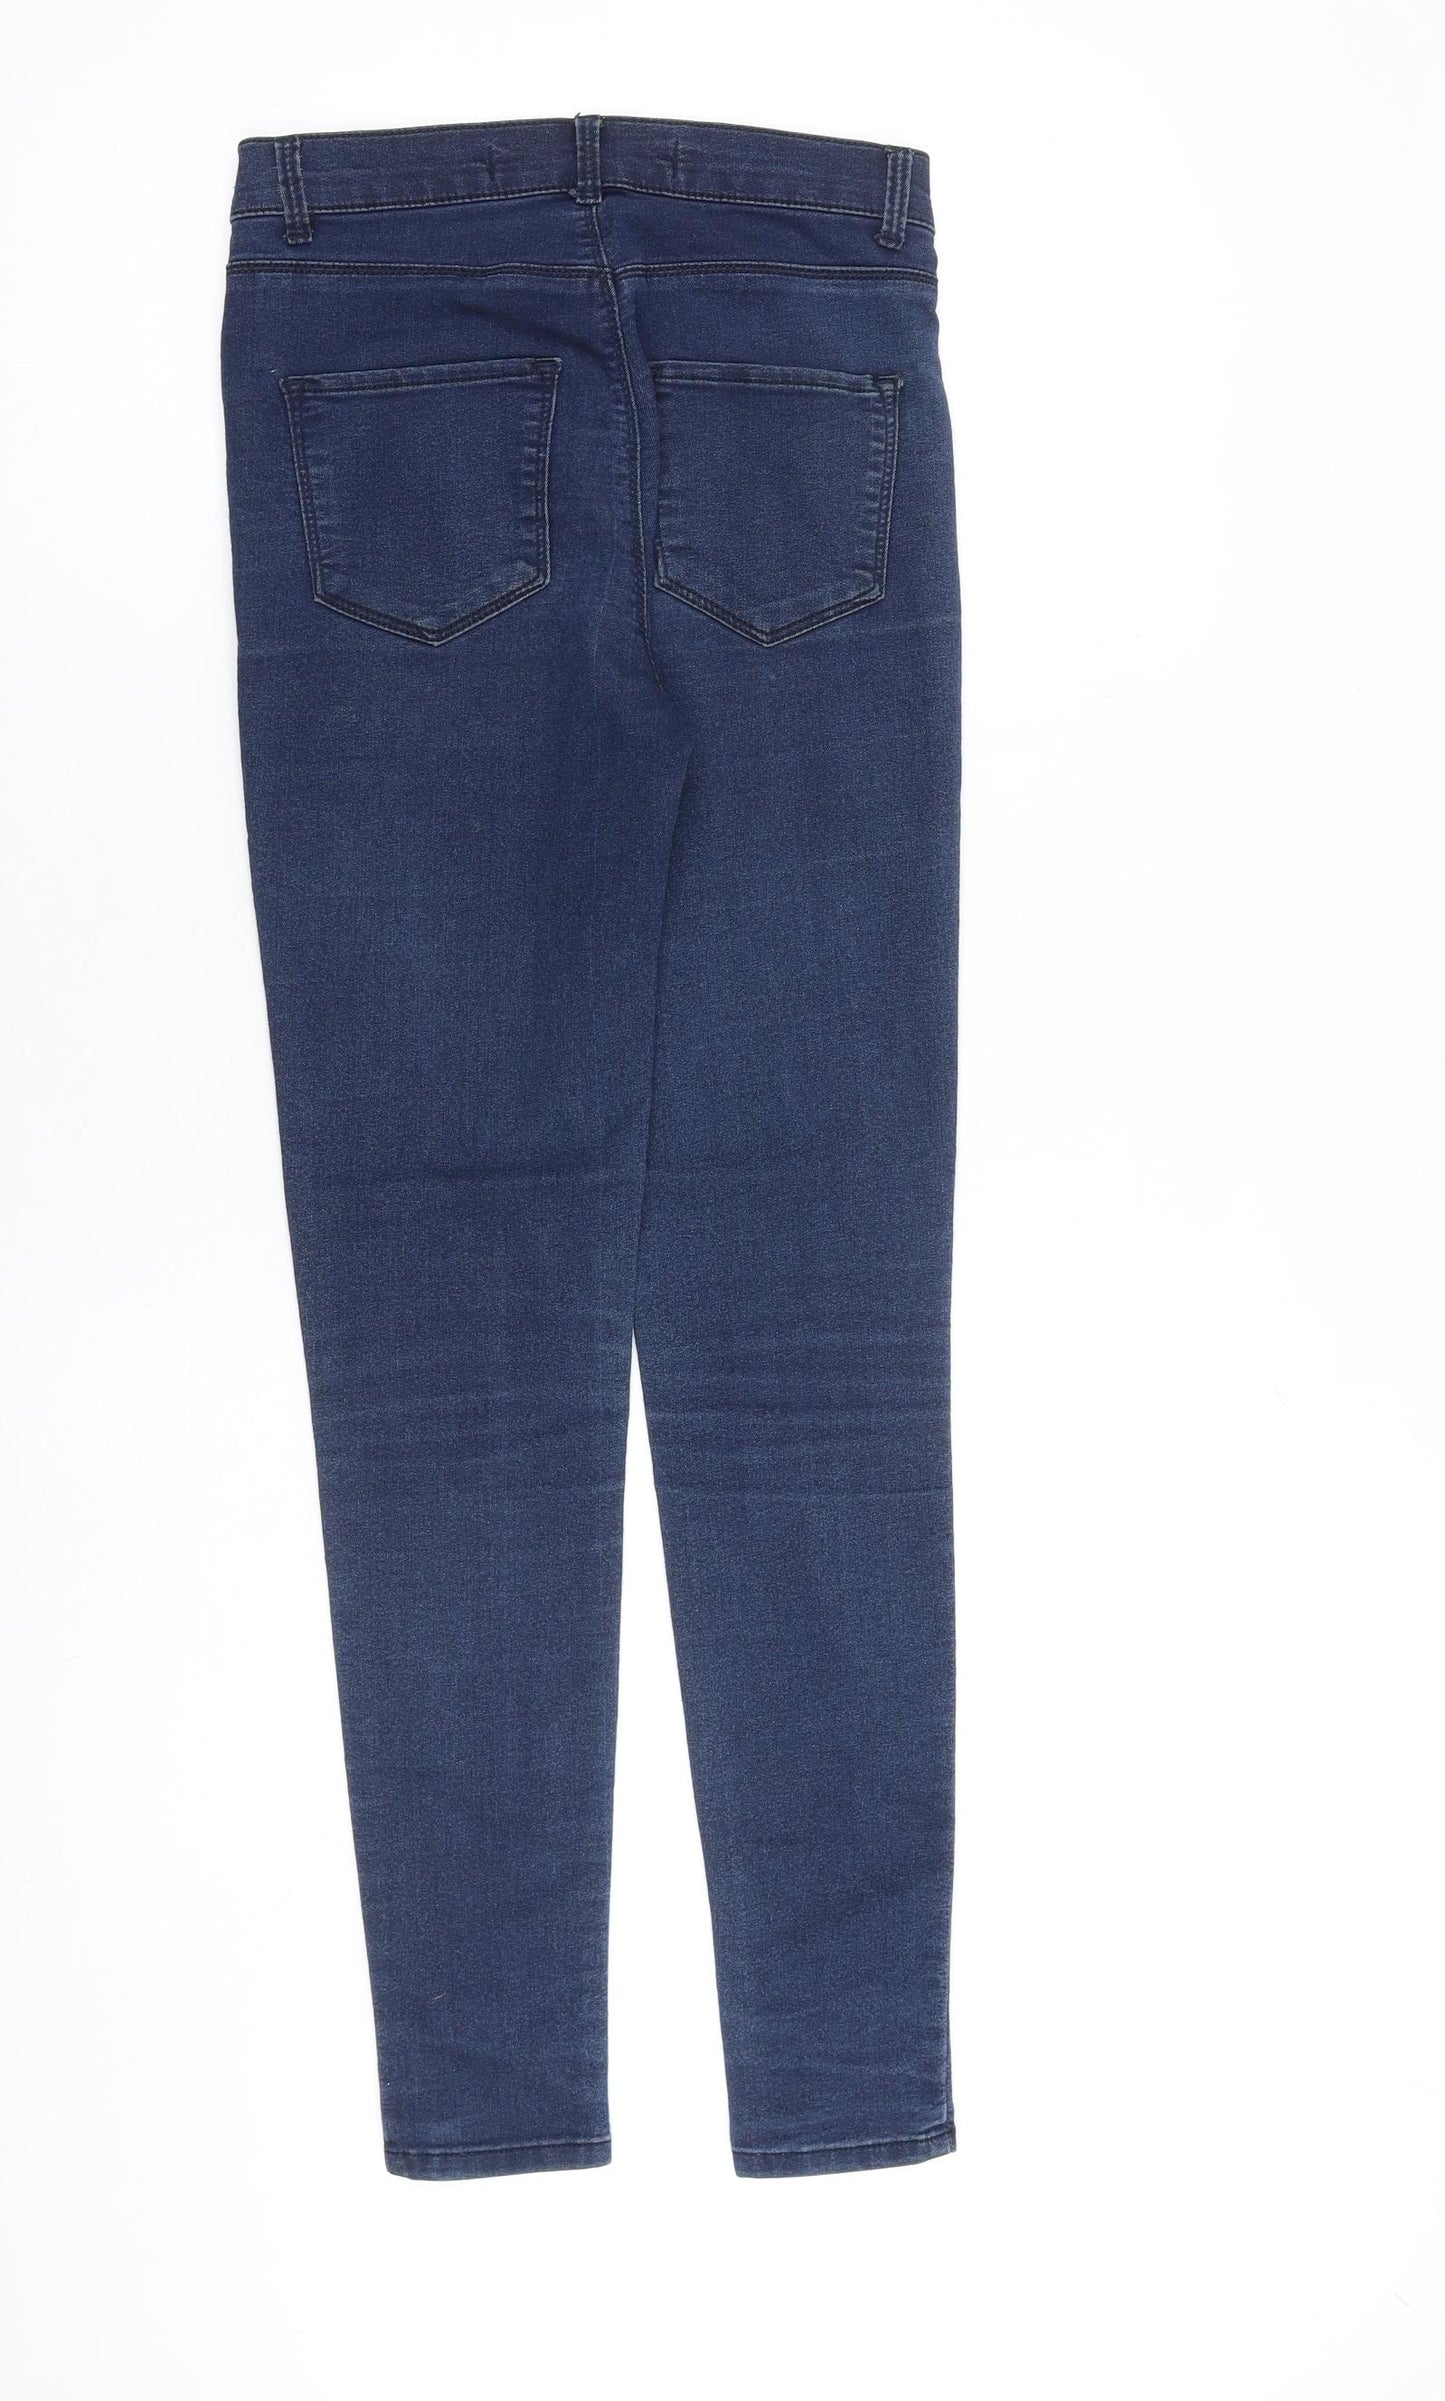 LCW Jeans Womens Blue Cotton Skinny Jeans Size 26 in L36 in Regular Zip